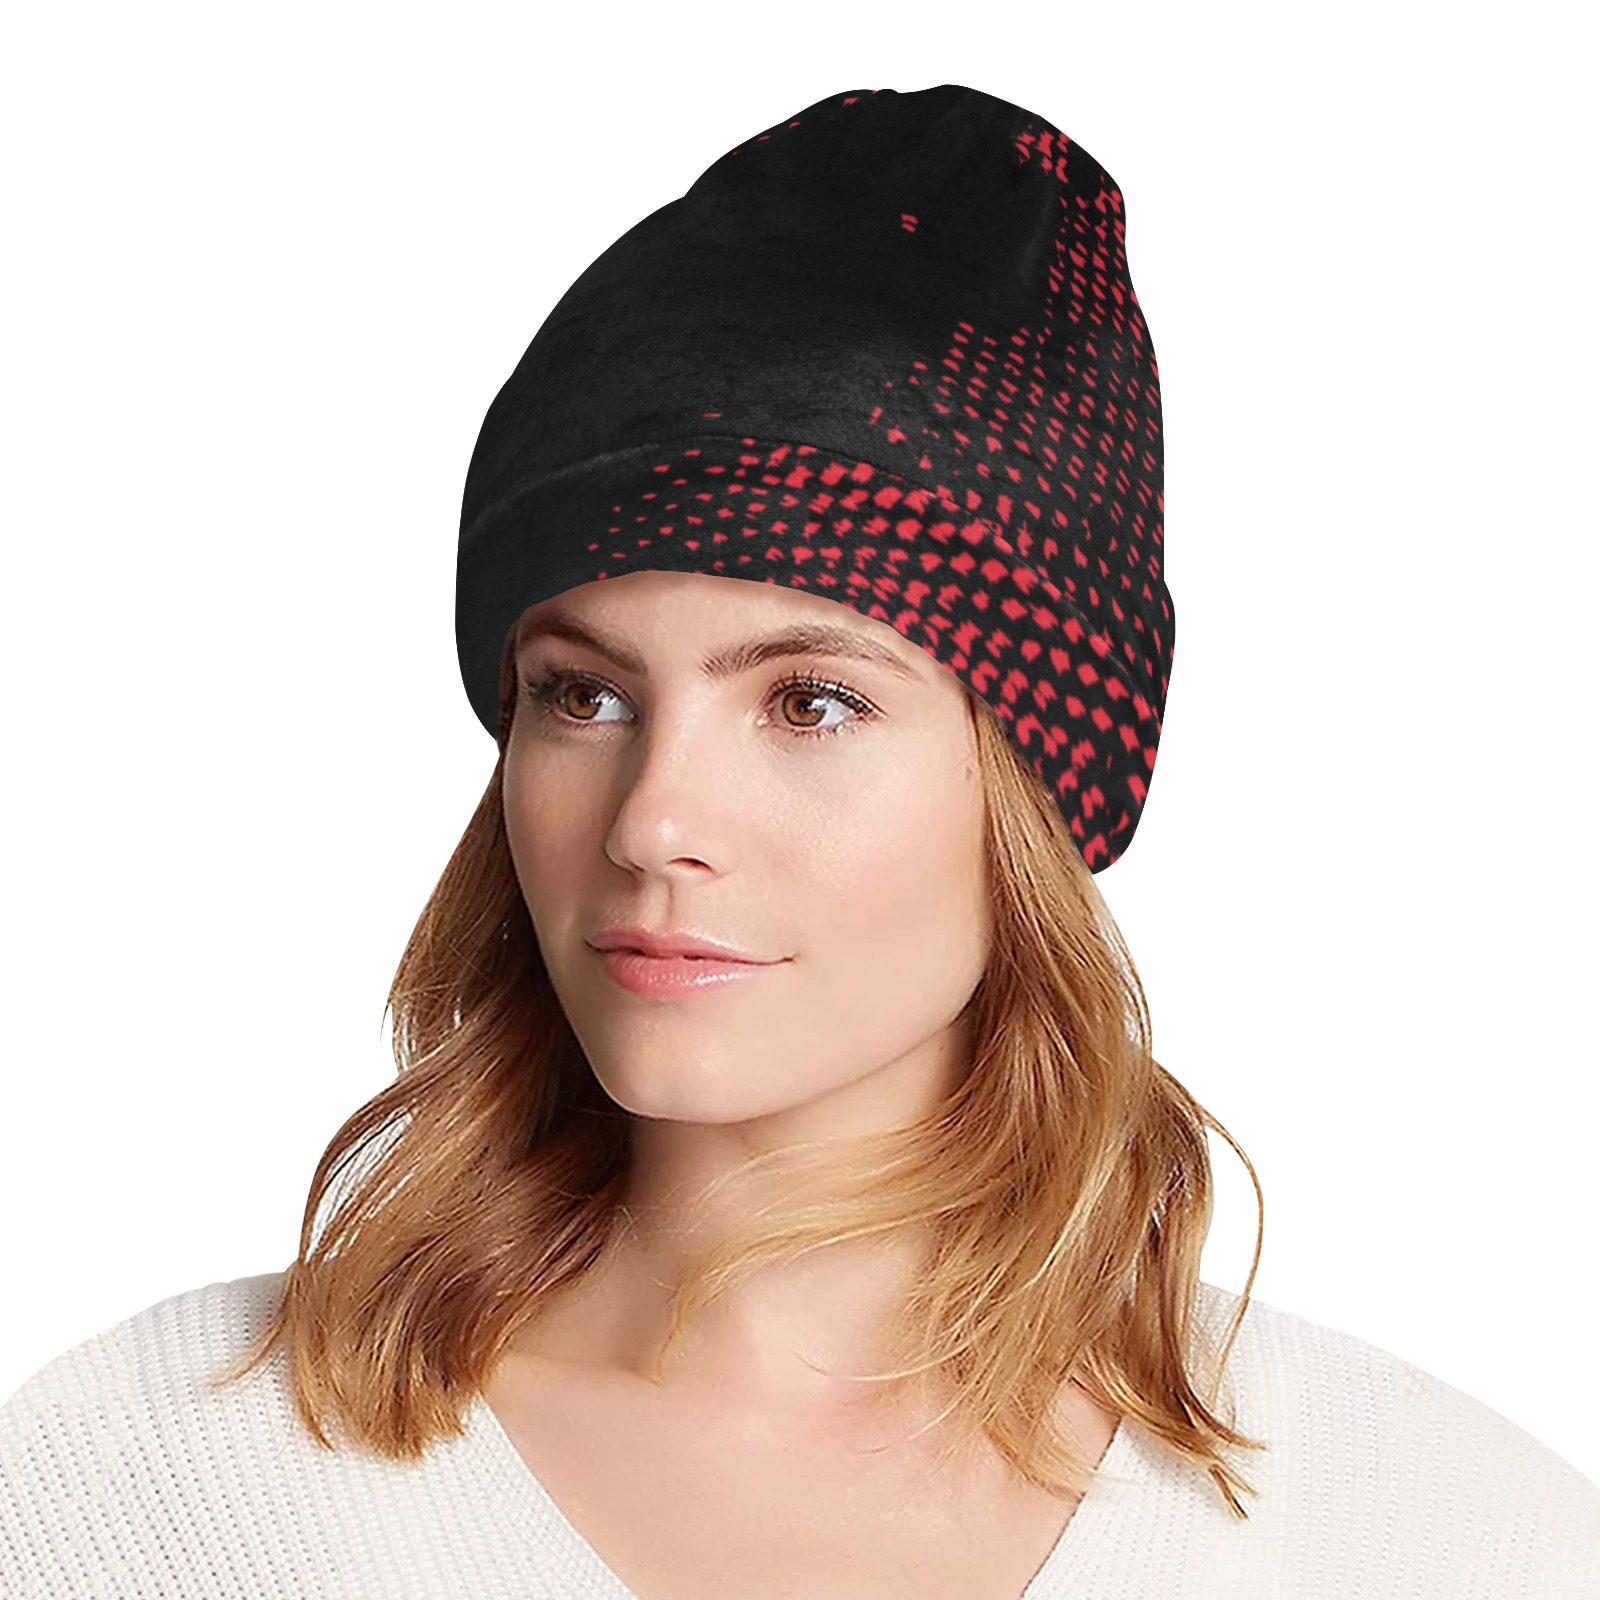 Red black fusion - Gorro Invierno All Over Print Beanie for Adults